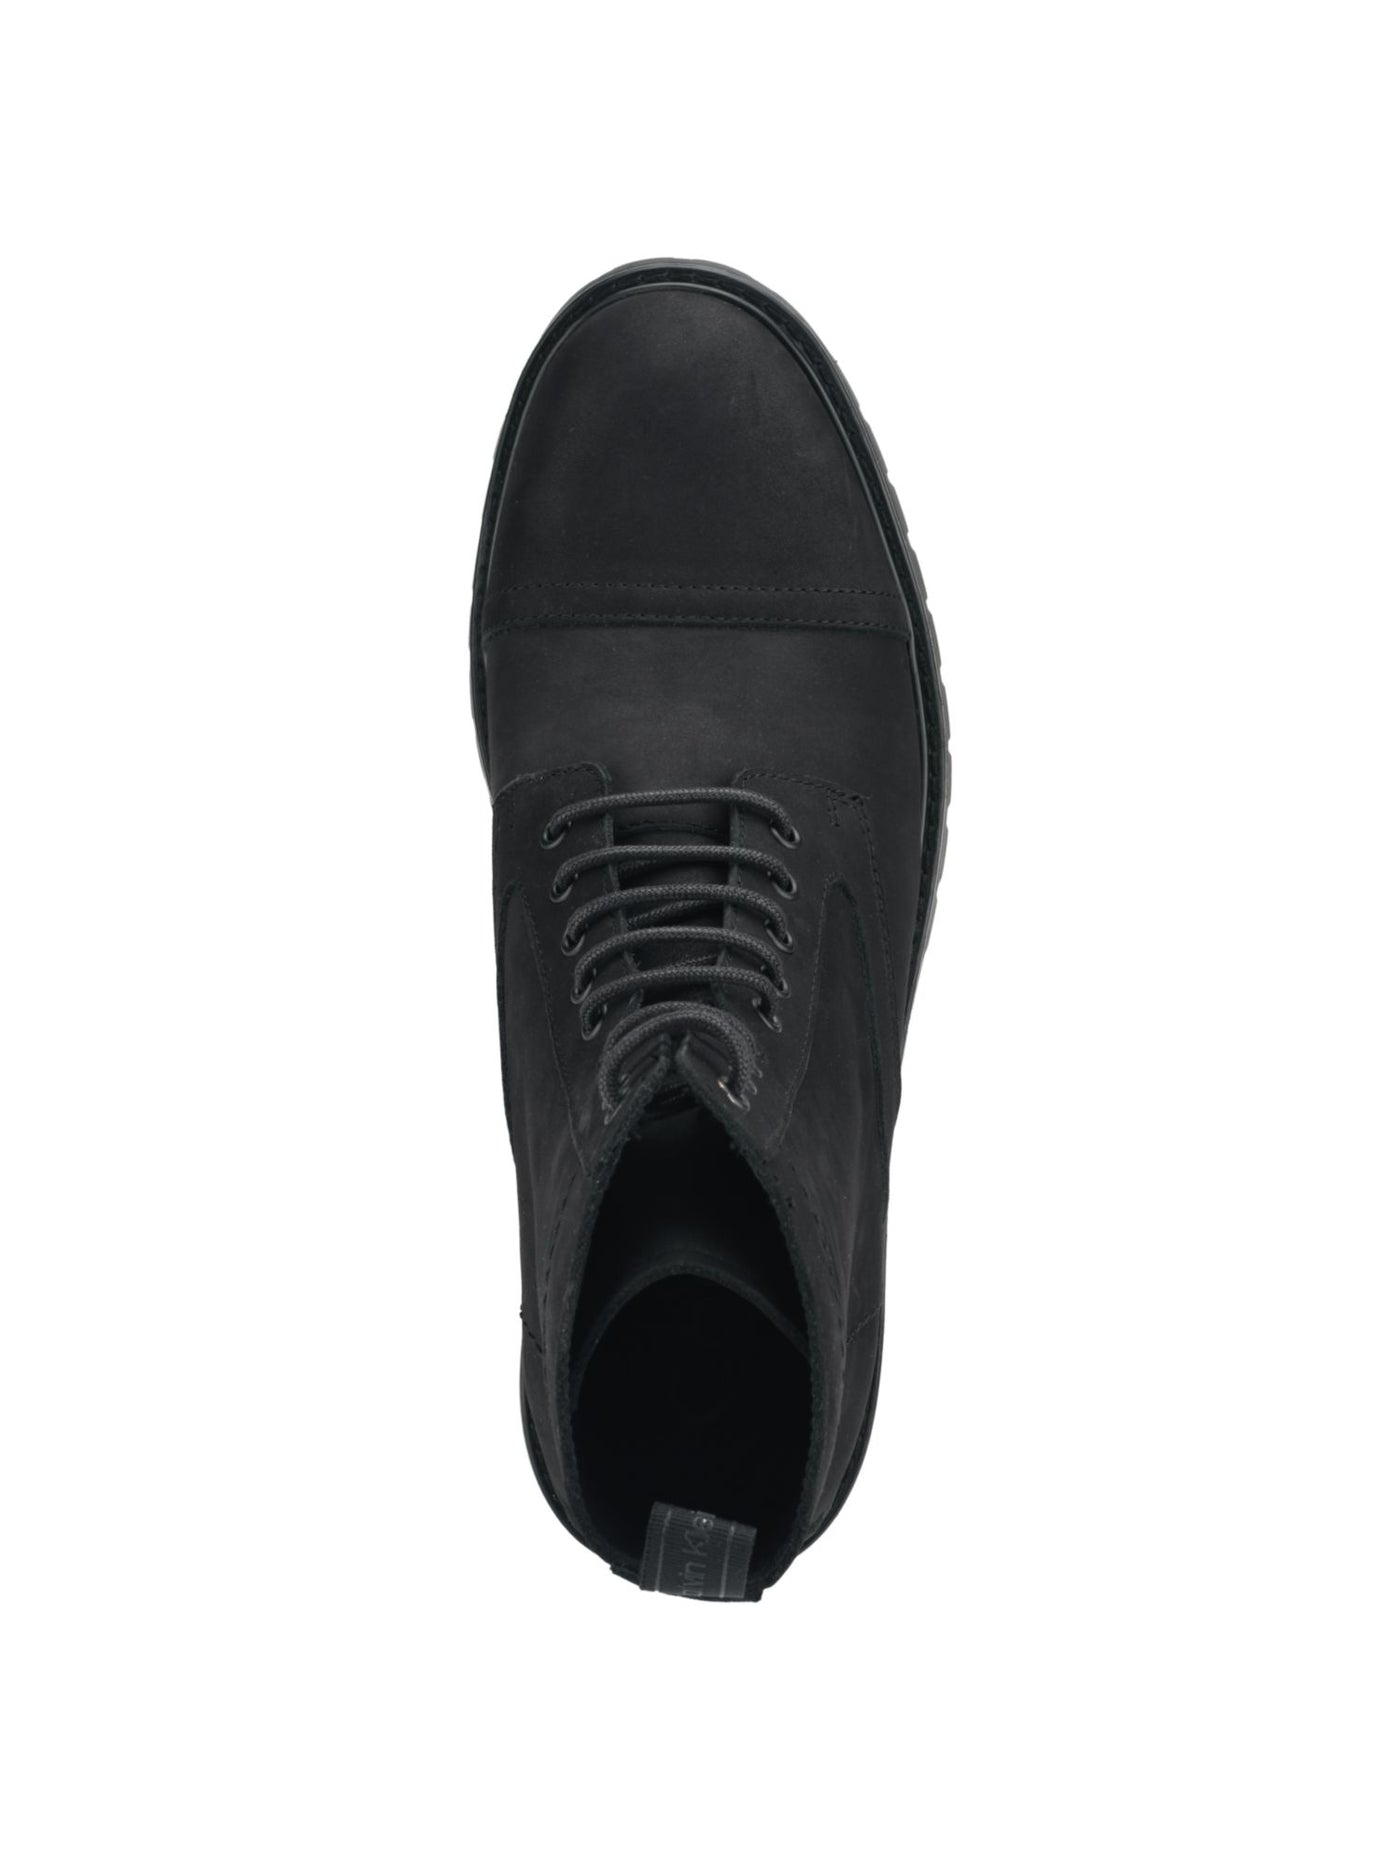 CALVIN KLEIN Mens Black Lug Sole Pull Tab Cushioned Removable Insole Lorenzo Round Toe Block Heel Lace-Up Boots Shoes 9 M